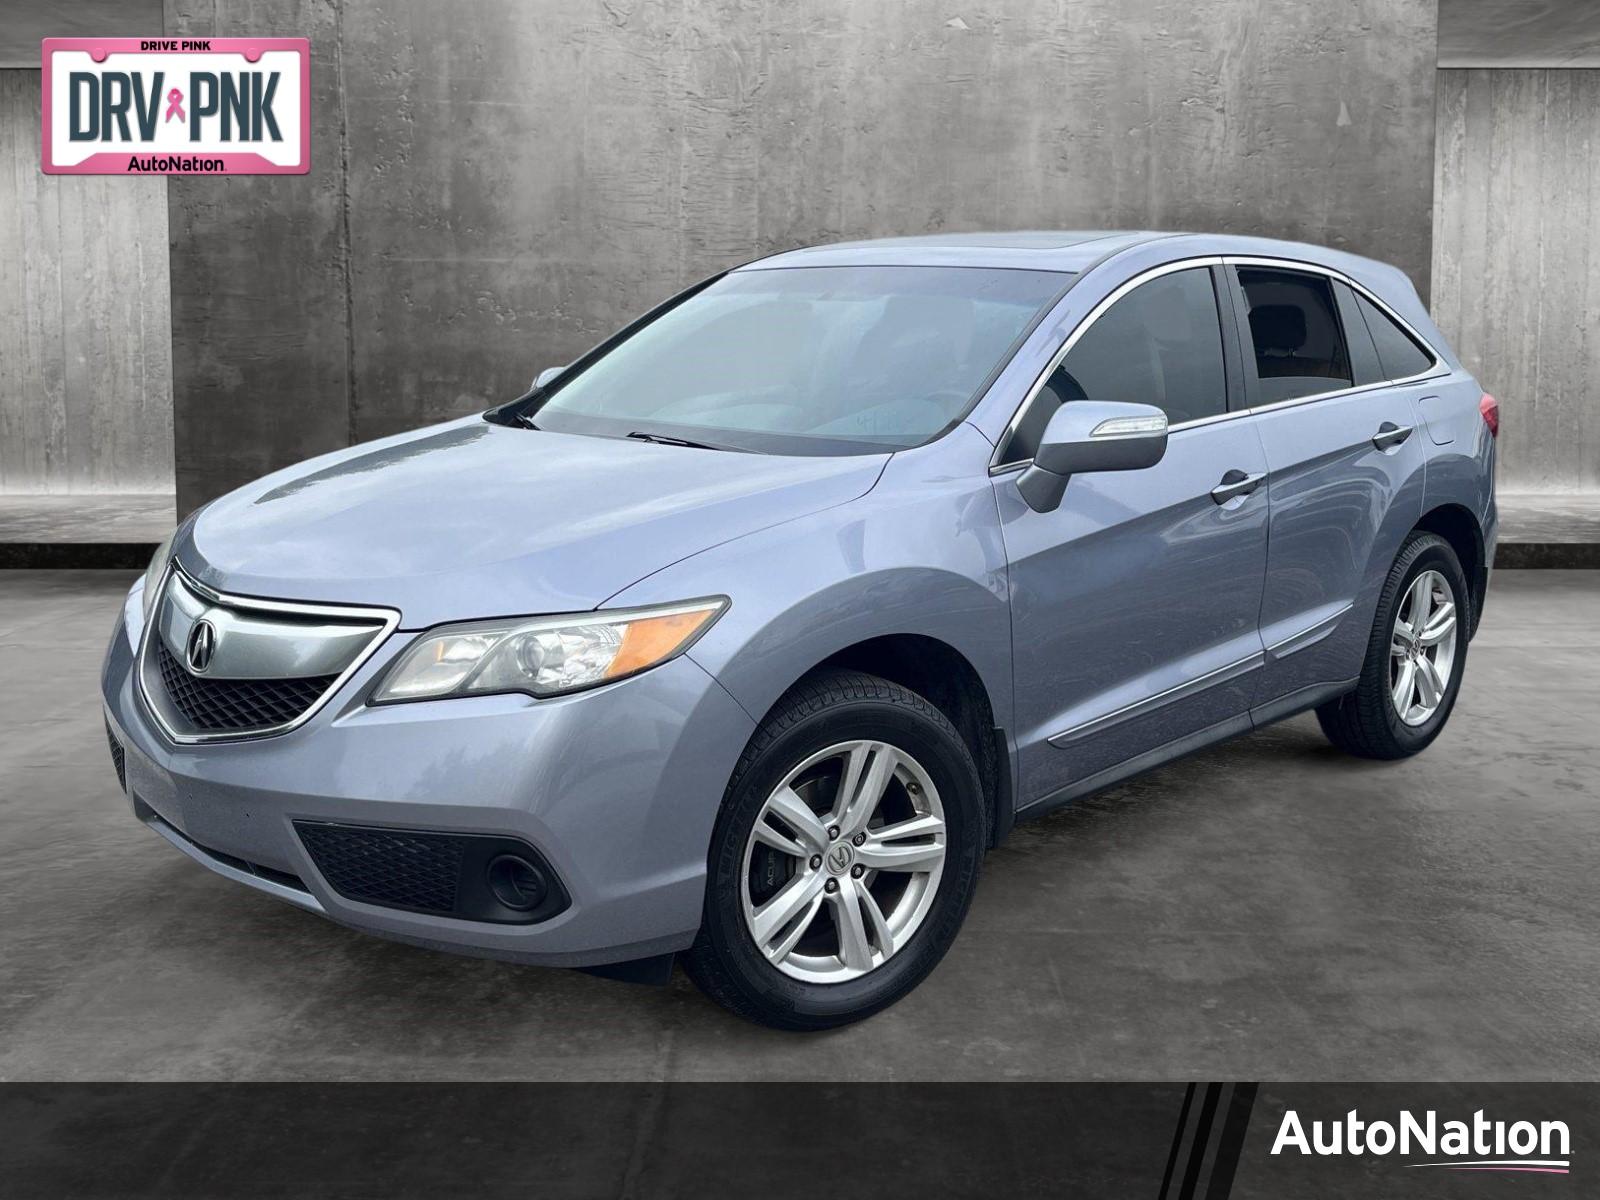 2013 Acura RDX Vehicle Photo in Clearwater, FL 33764